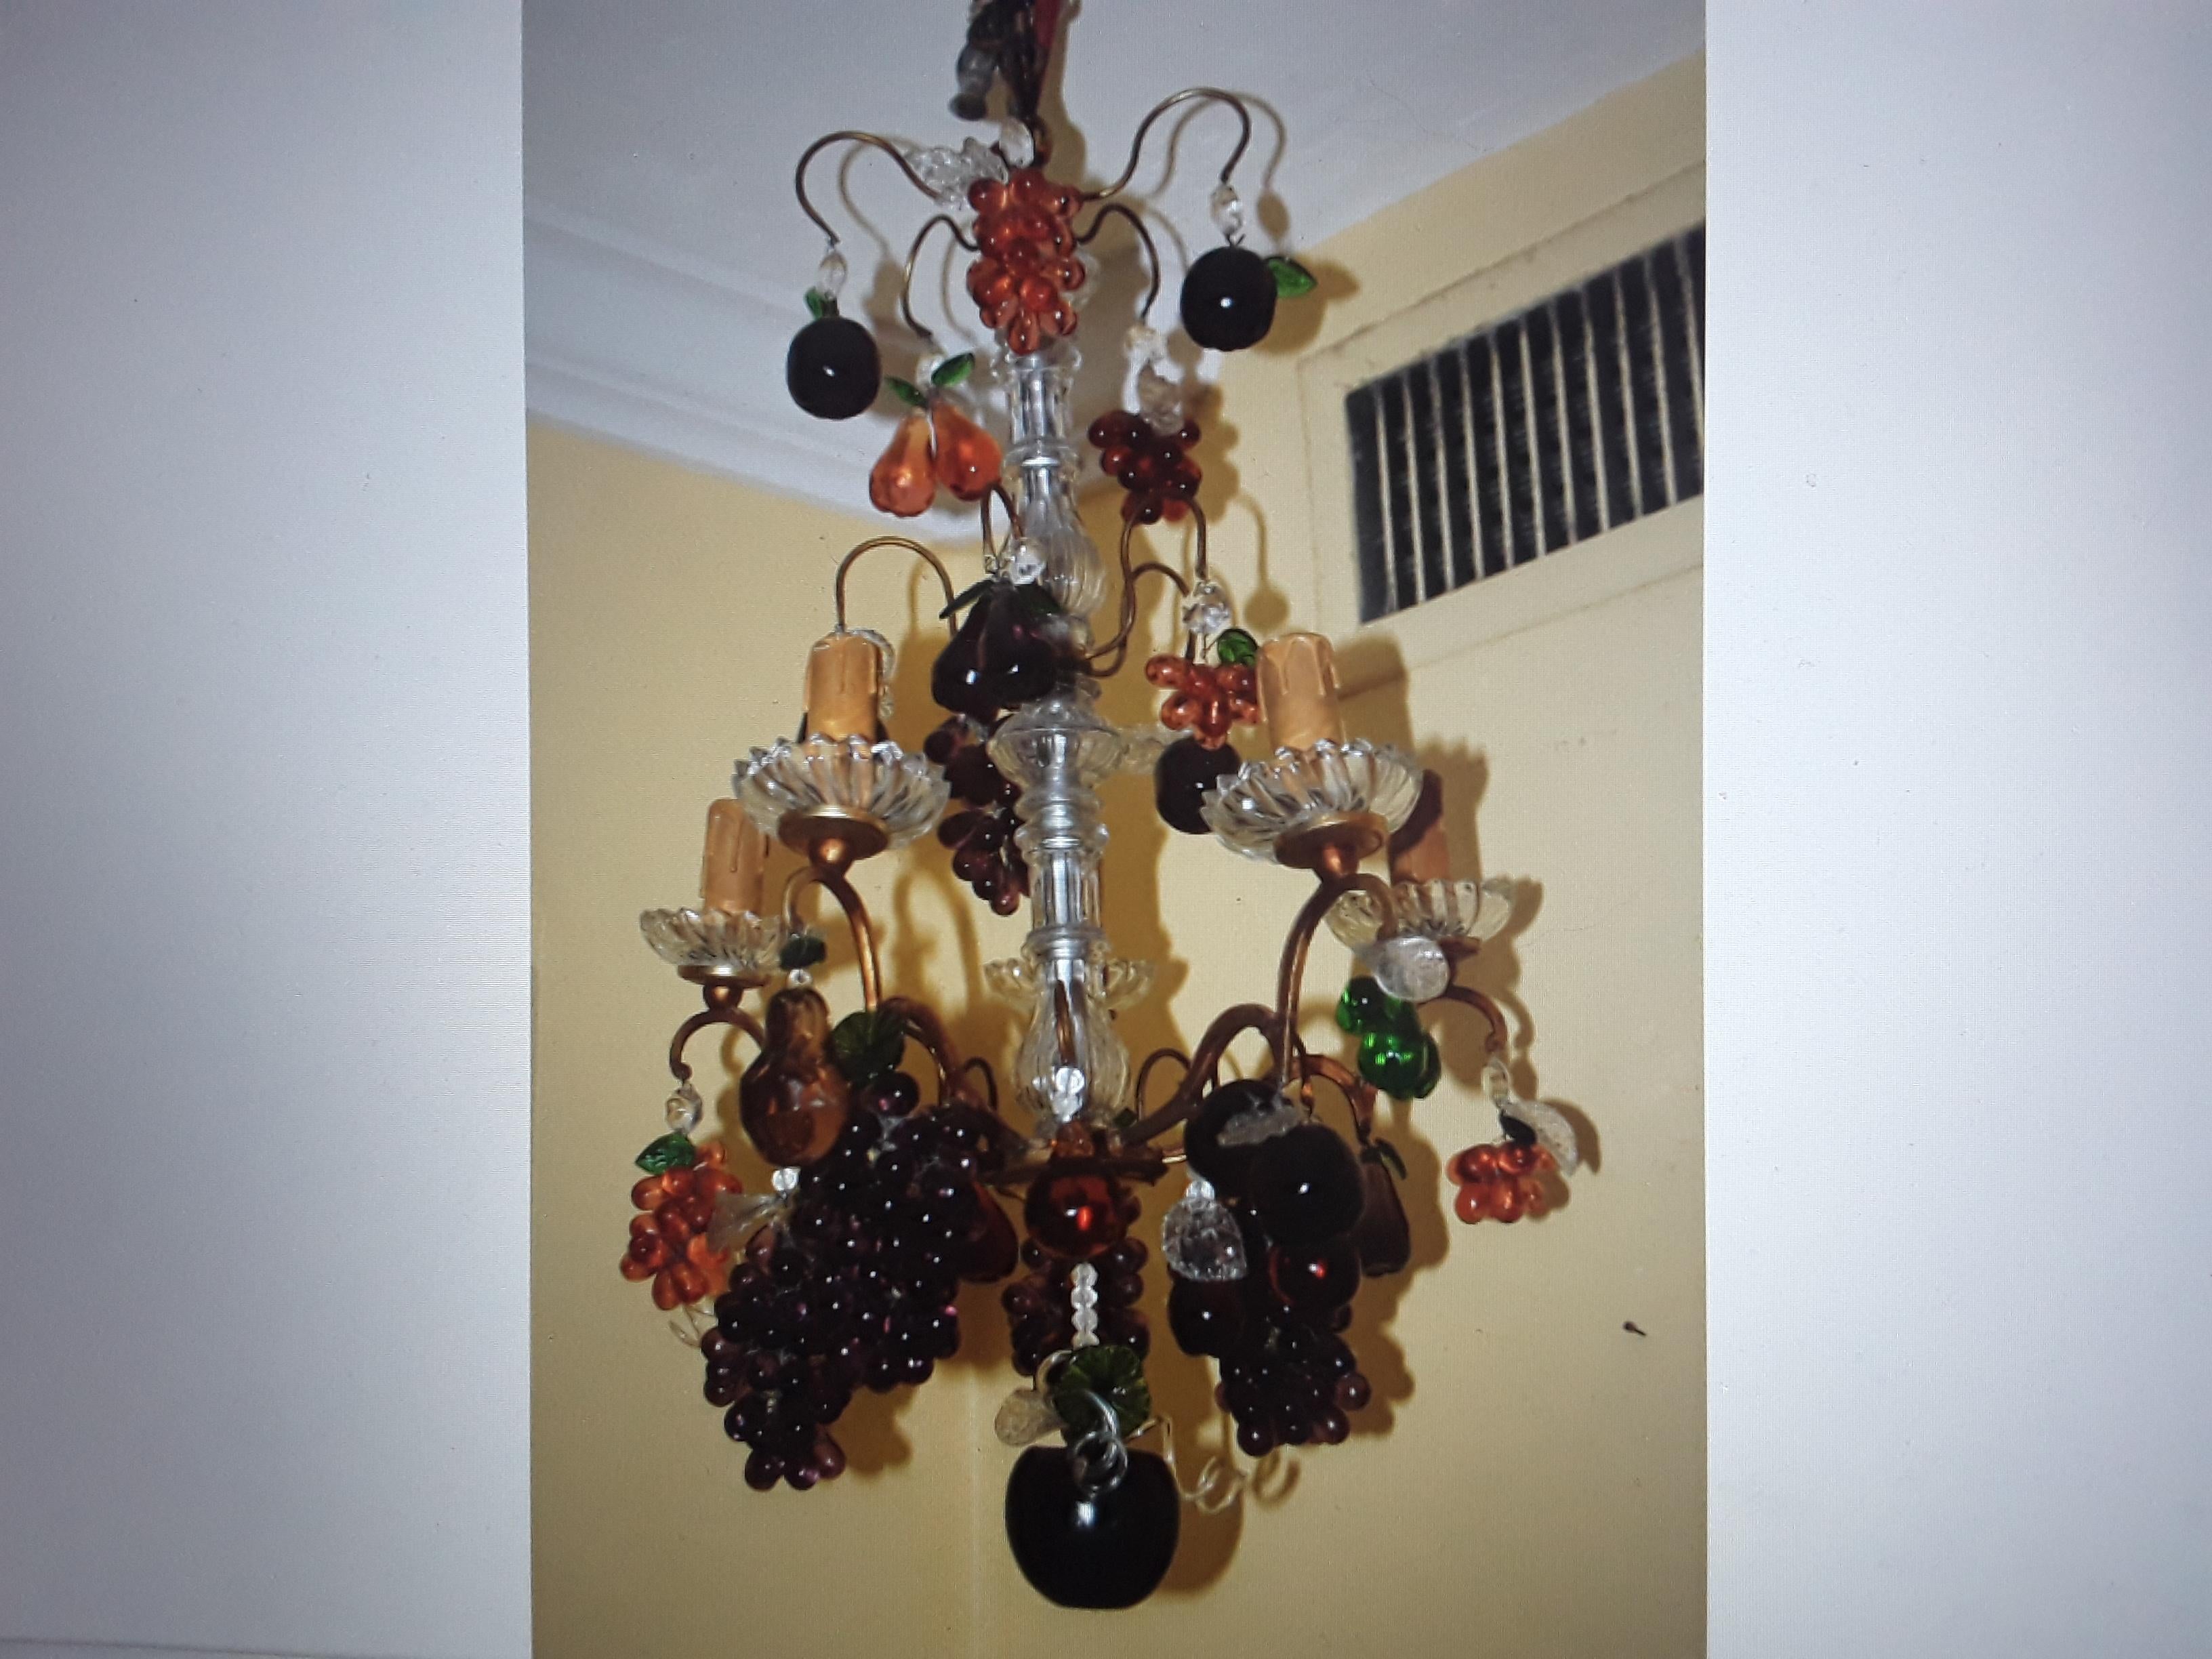 Special chandelier here! 19thc French Antique Louis Rococo style Chandelier Laden with Crystal Fruit. Bronze and crystal framed. French estate find.